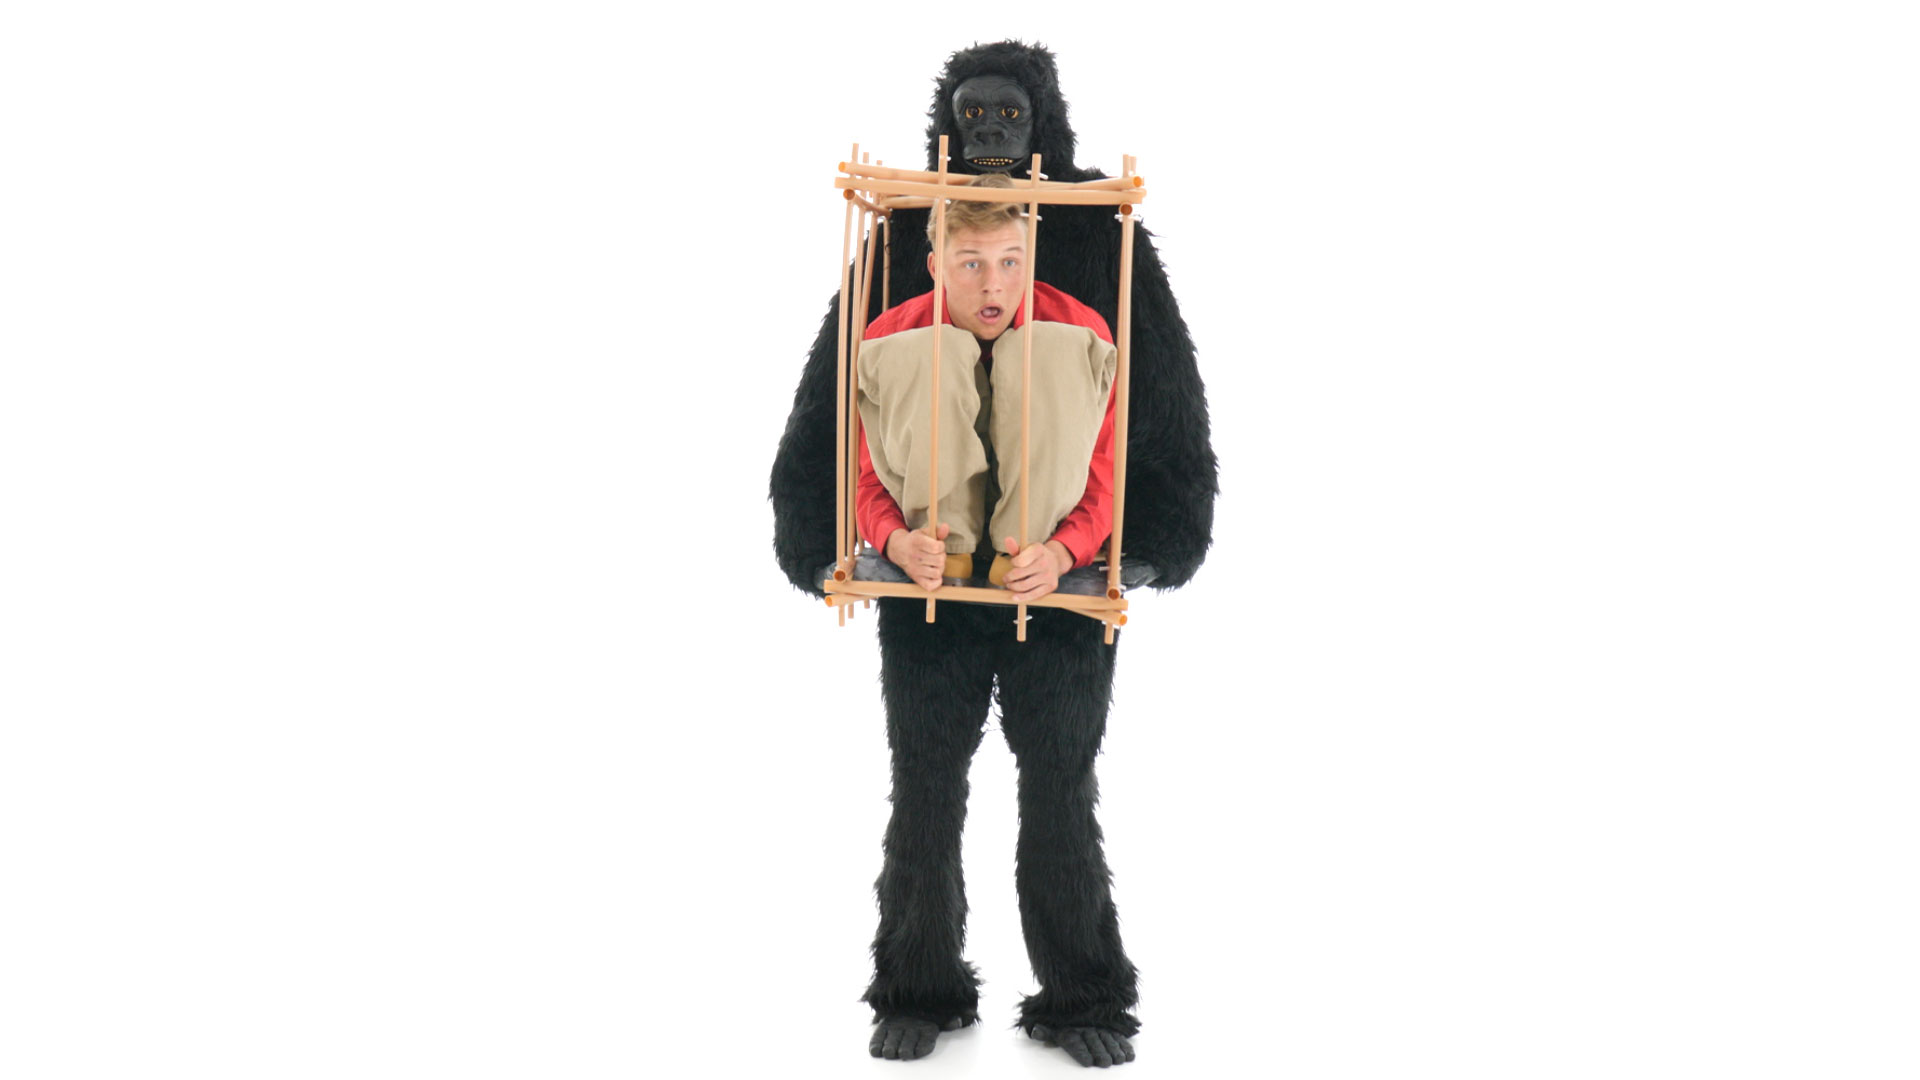 Win the costume party with this Man in a Gorilla Cage Costume! This unique illusion costume makes a funny Halloween costume idea for adults.